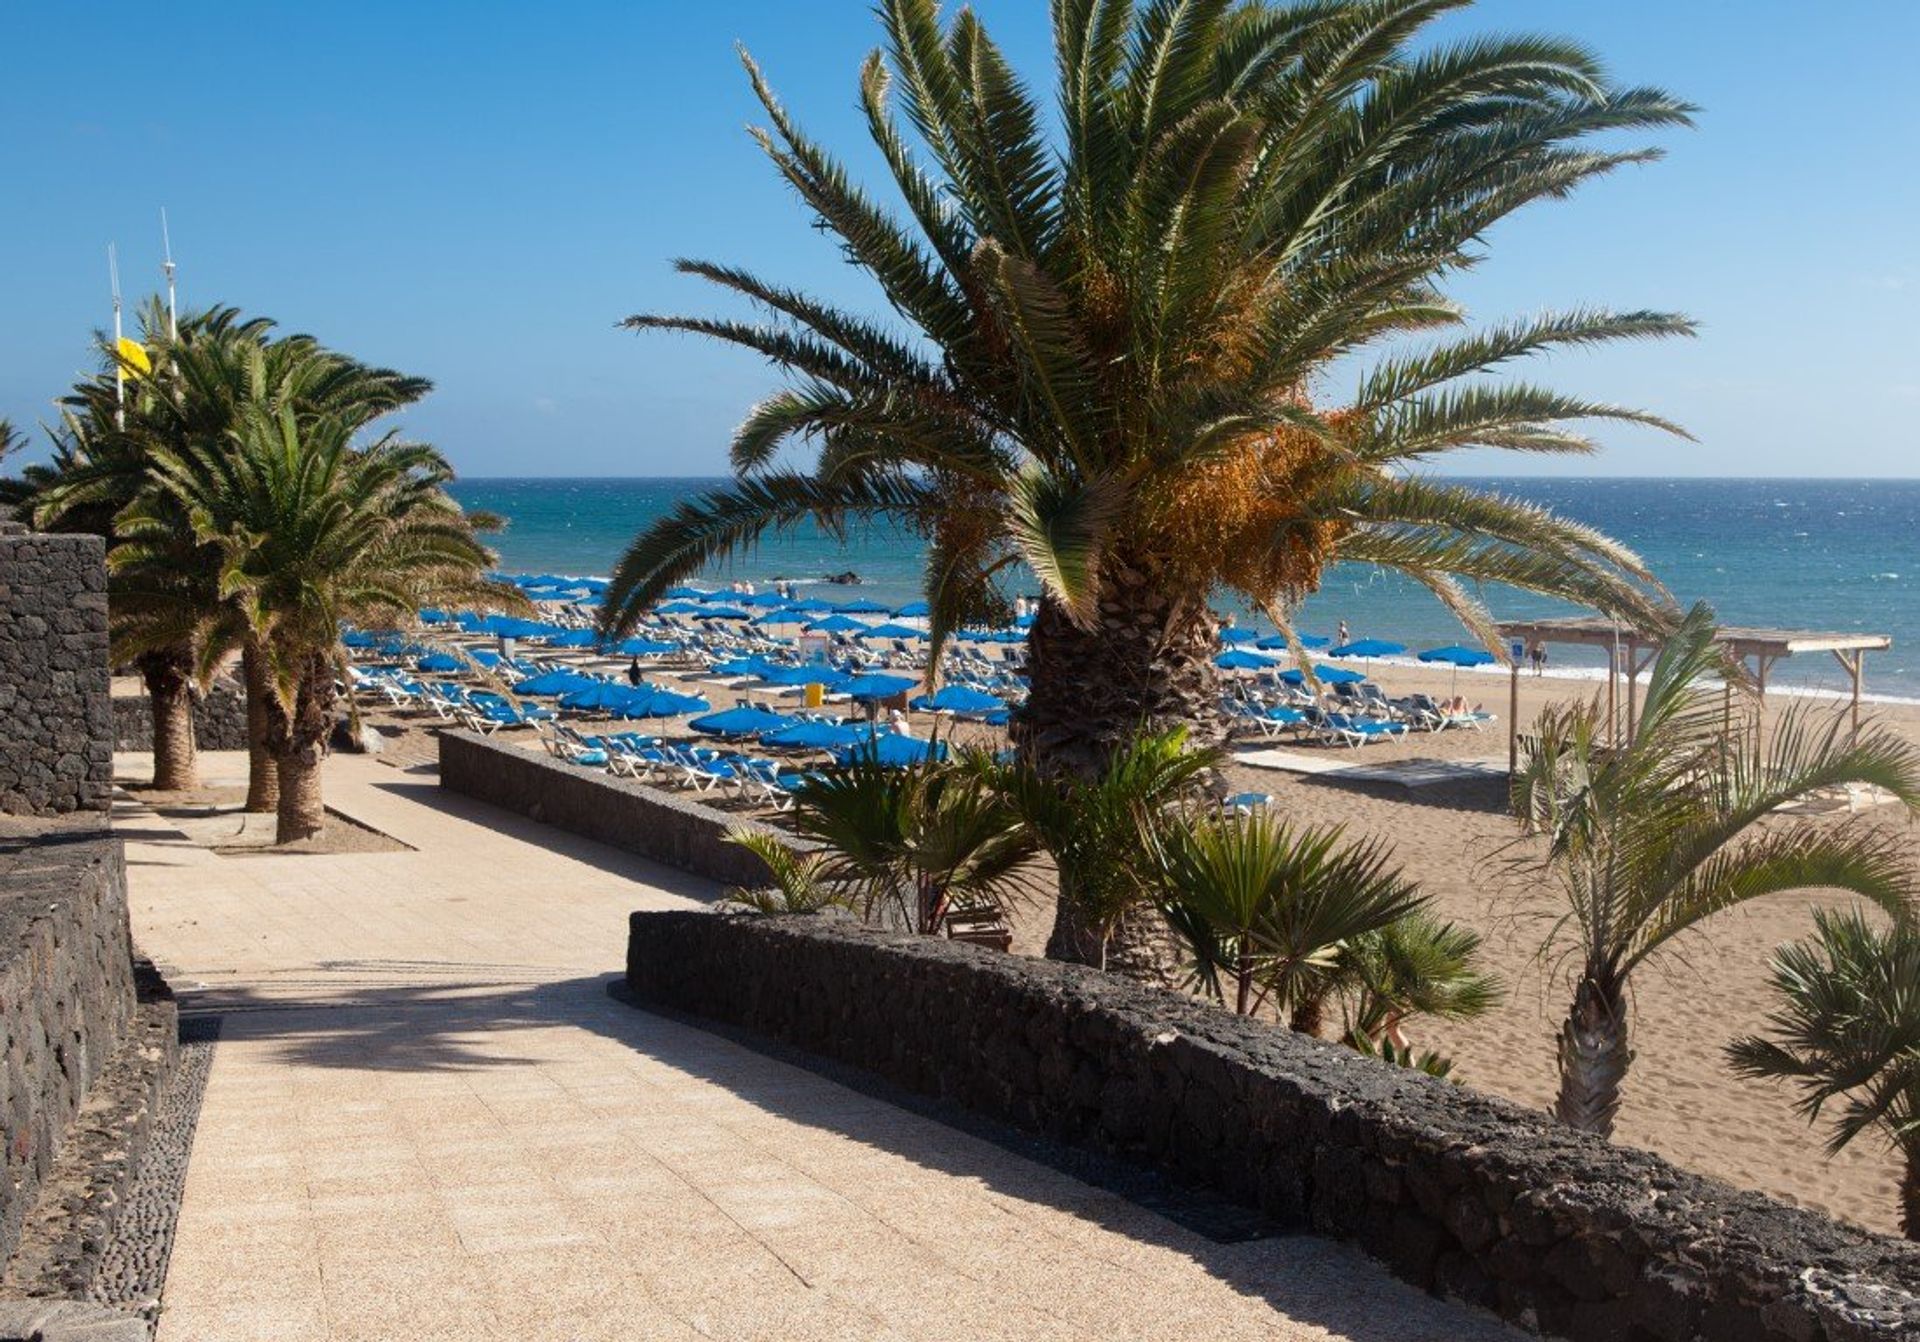 The lively beach resort of Puerto del Carmen is just a few km away by car